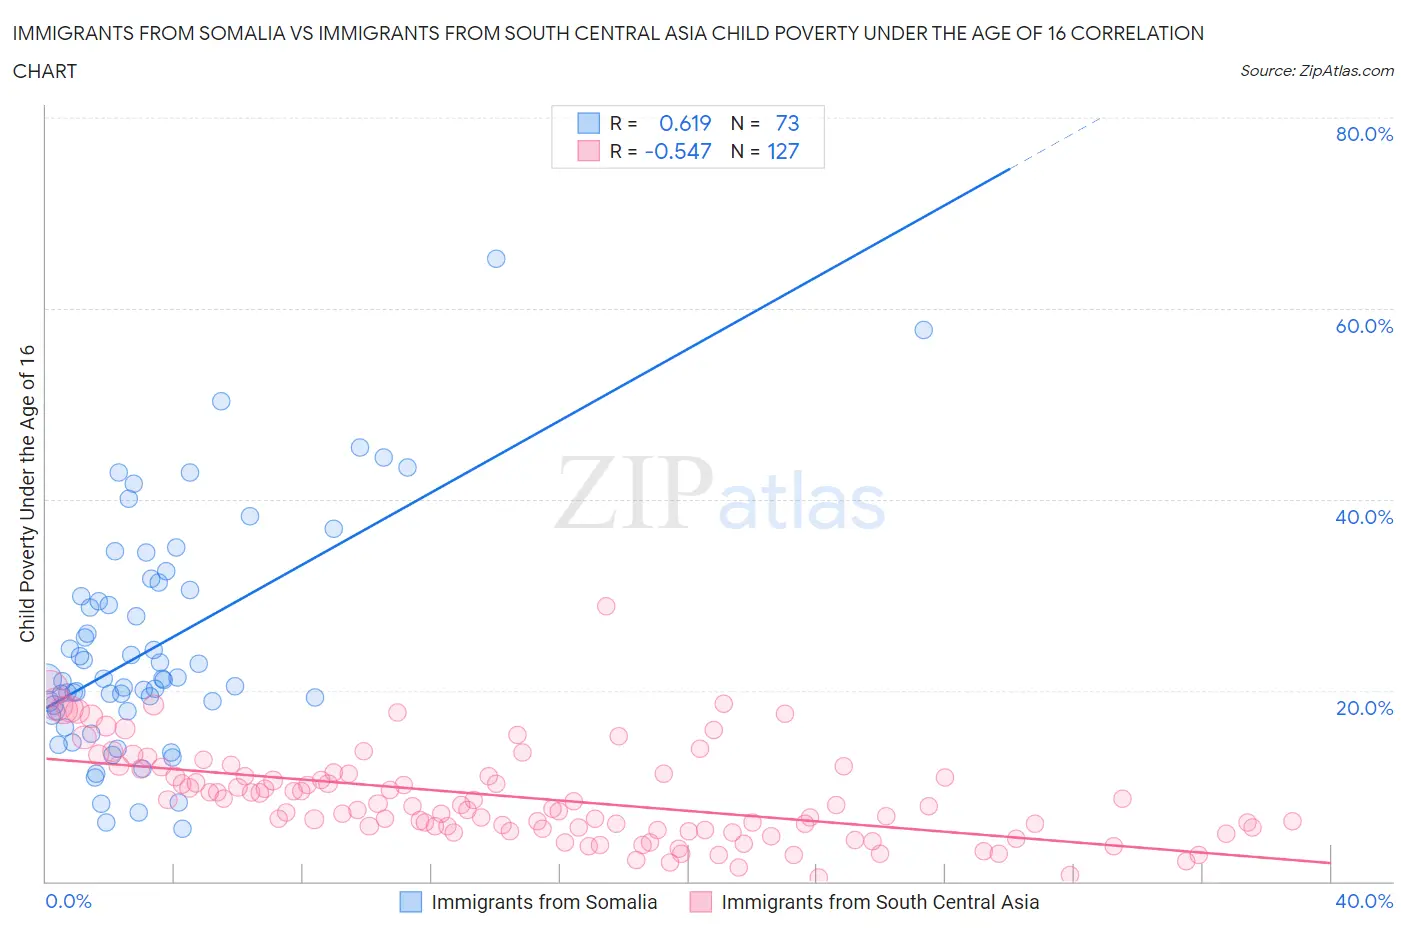 Immigrants from Somalia vs Immigrants from South Central Asia Child Poverty Under the Age of 16